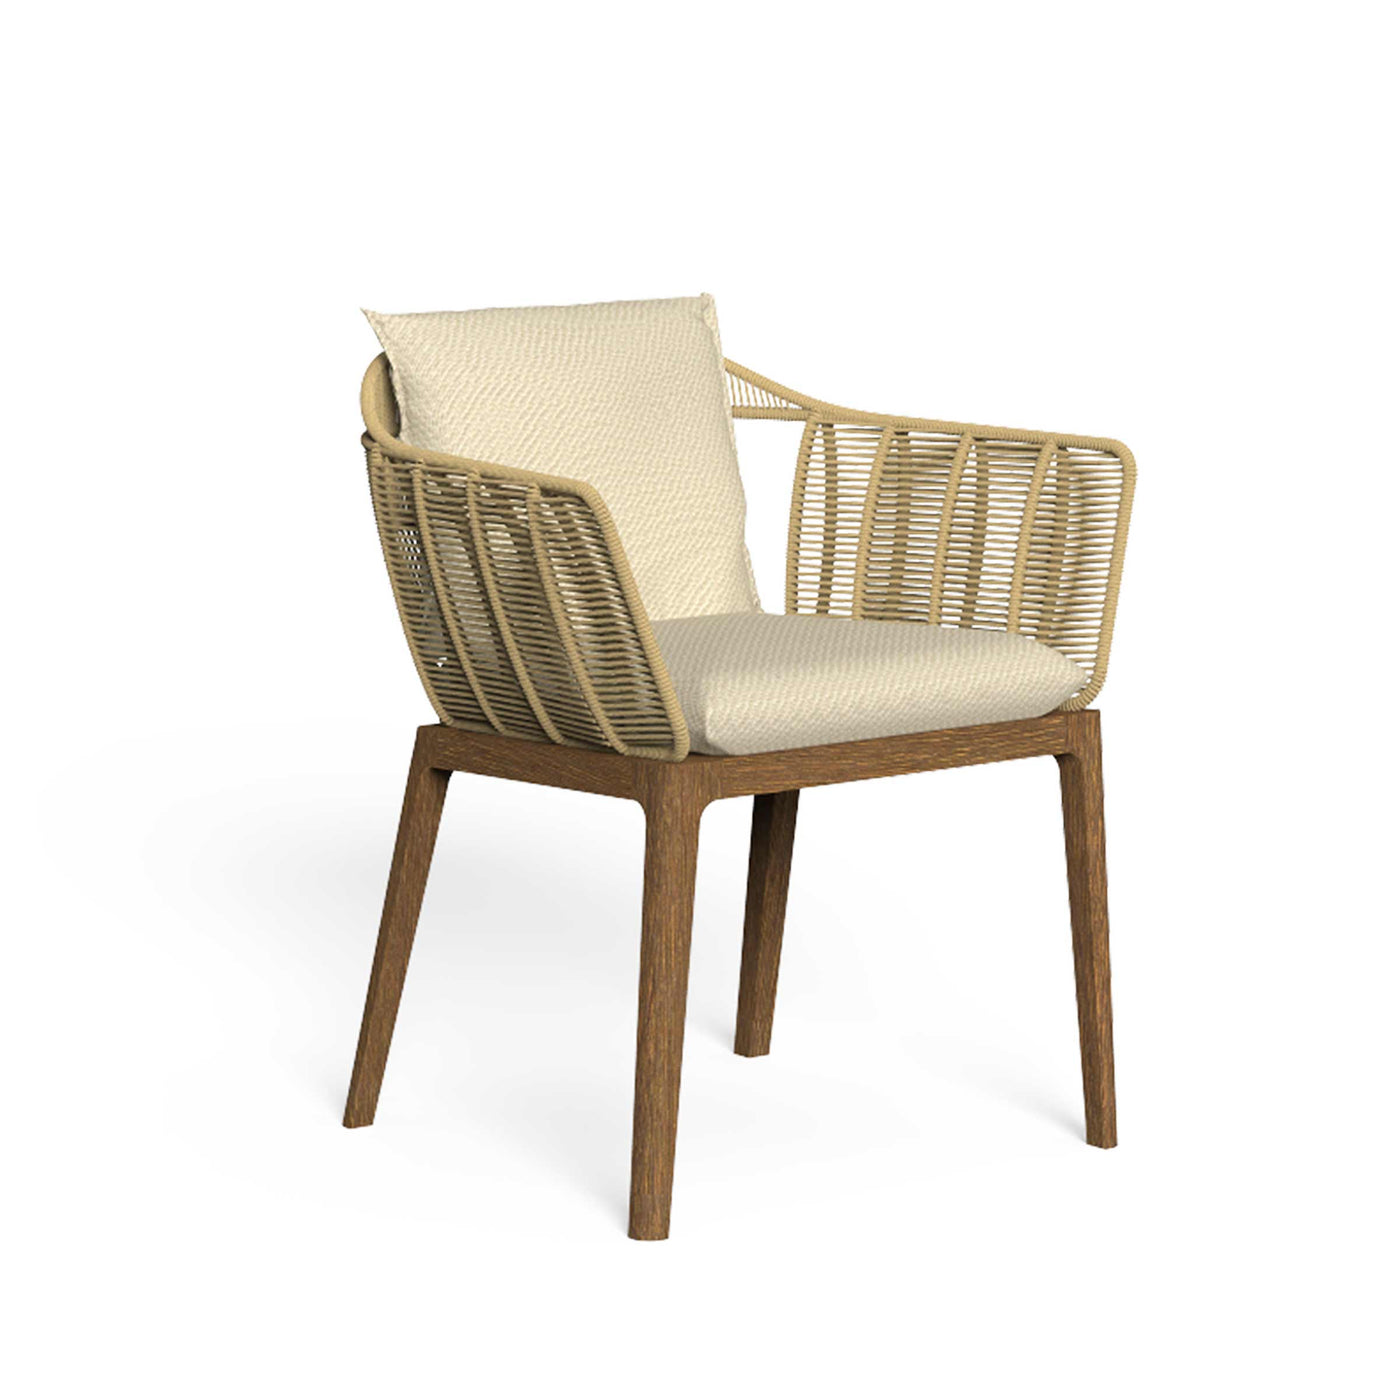 Outdoor Dining Chair CRUISE Teak by Ludovica + Roberto Palomba for Talenti 01